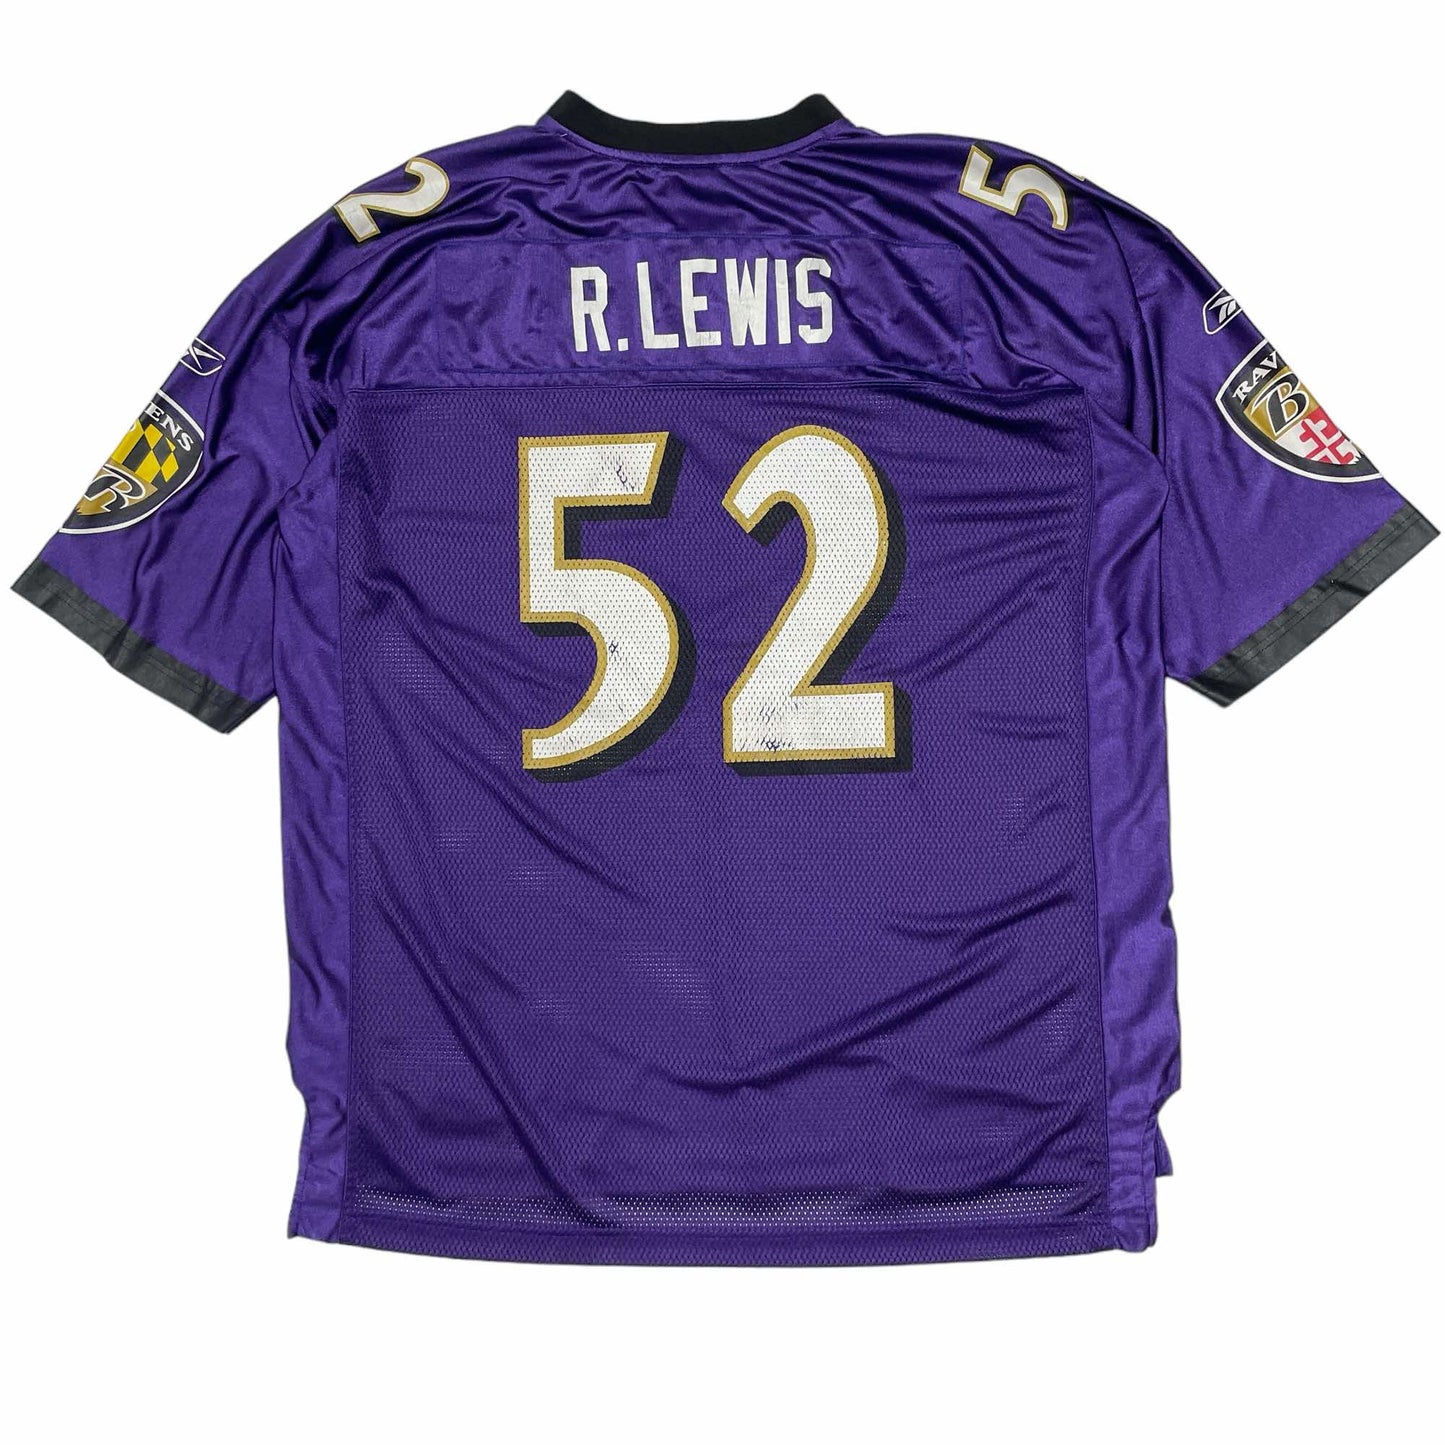 baltimore nfl jersey locations